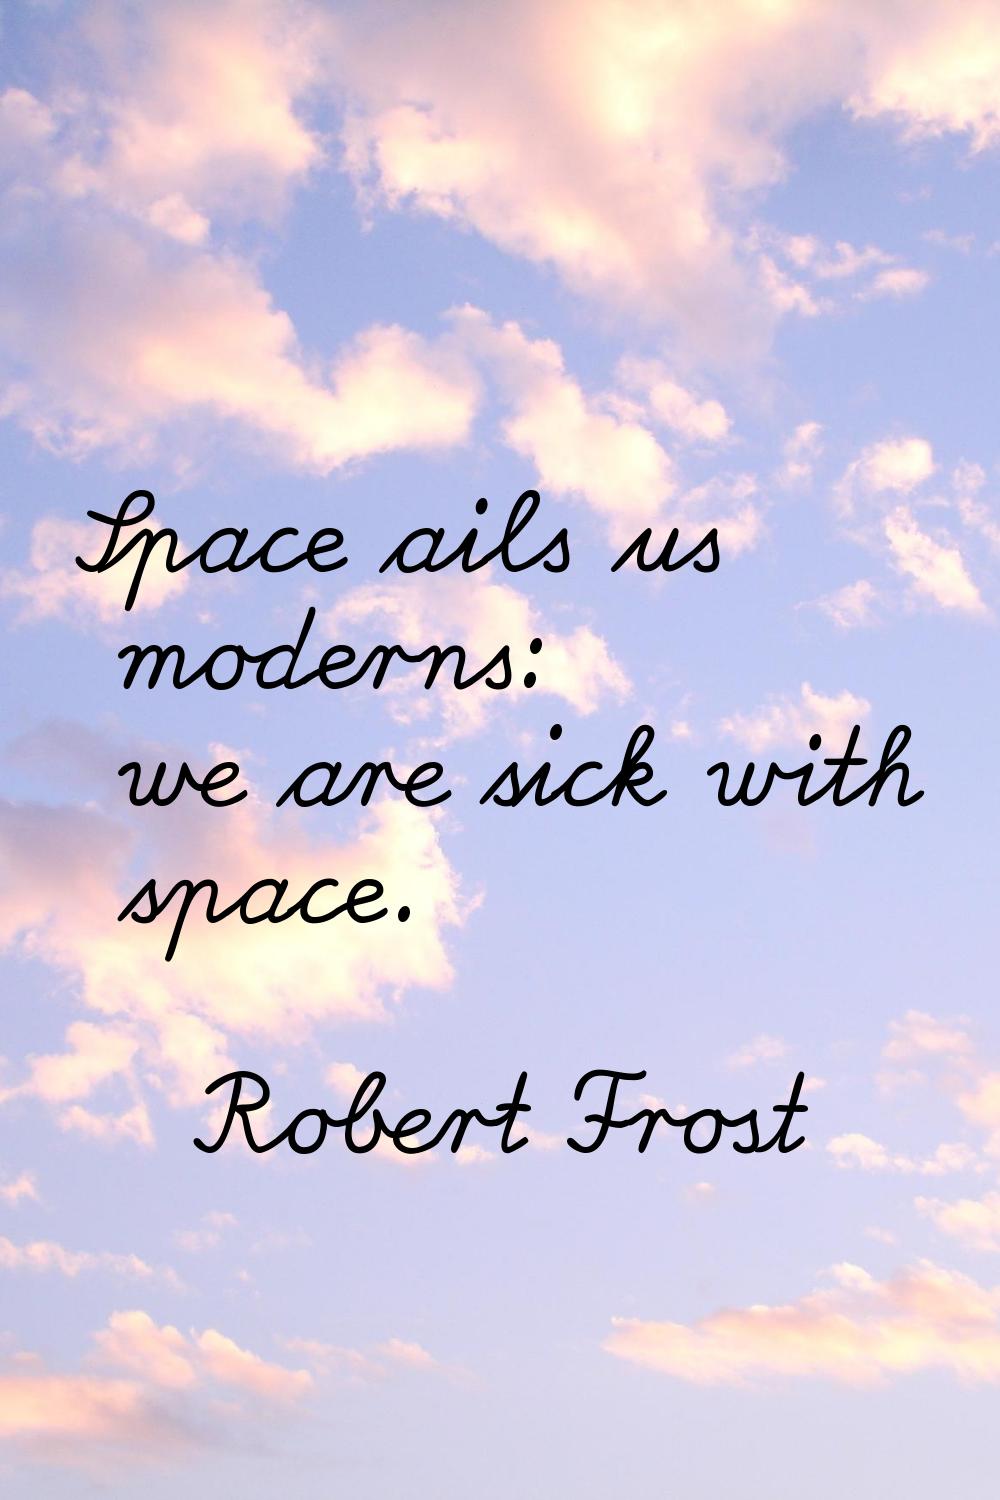 Space ails us moderns: we are sick with space.